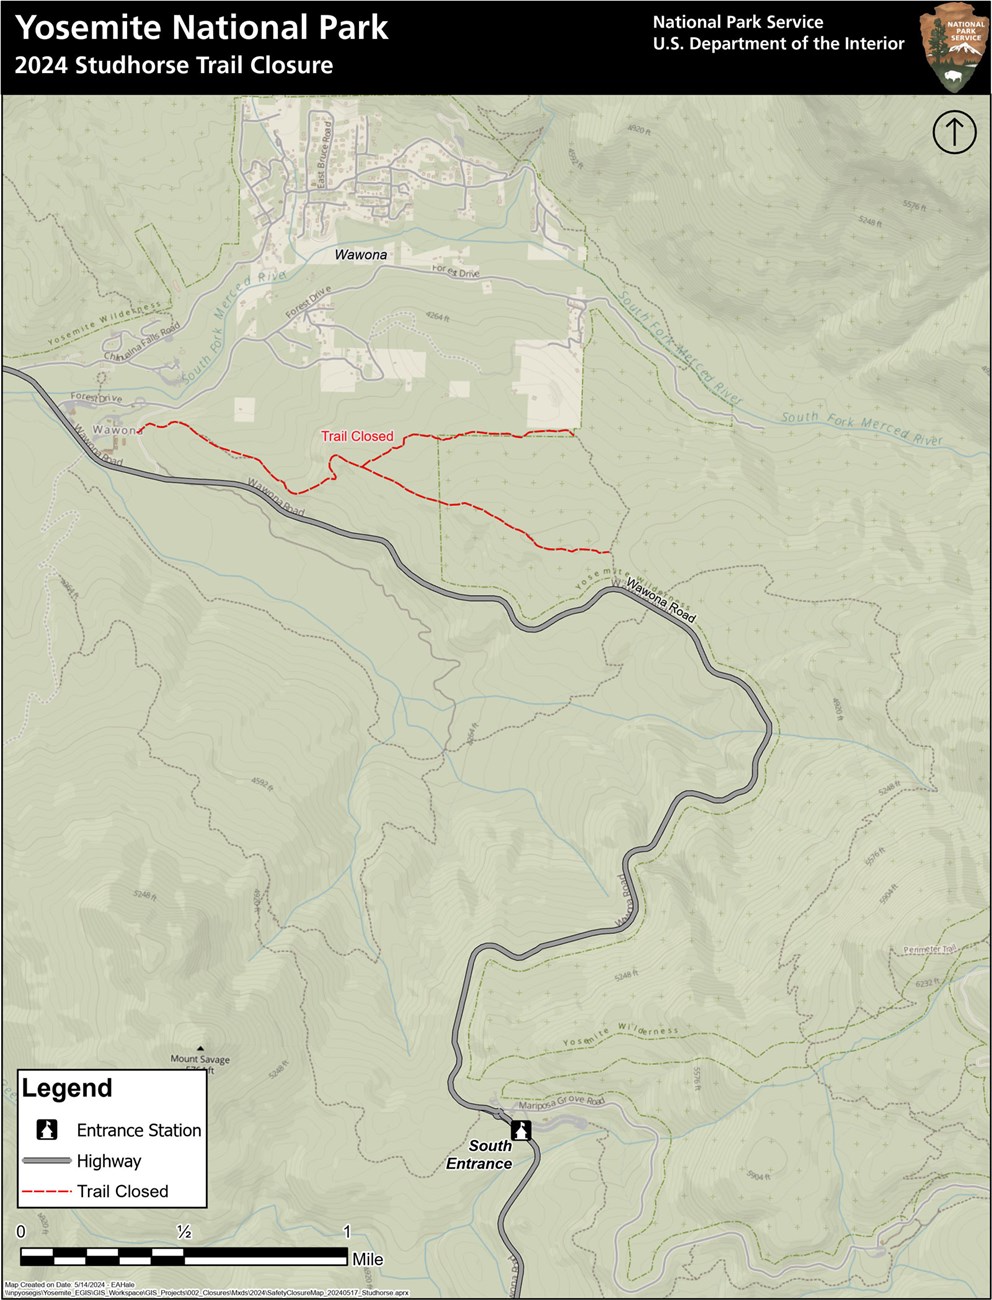 Map showing trails closed between Wawona Hotel and where they meet Wawona Road to the south/east